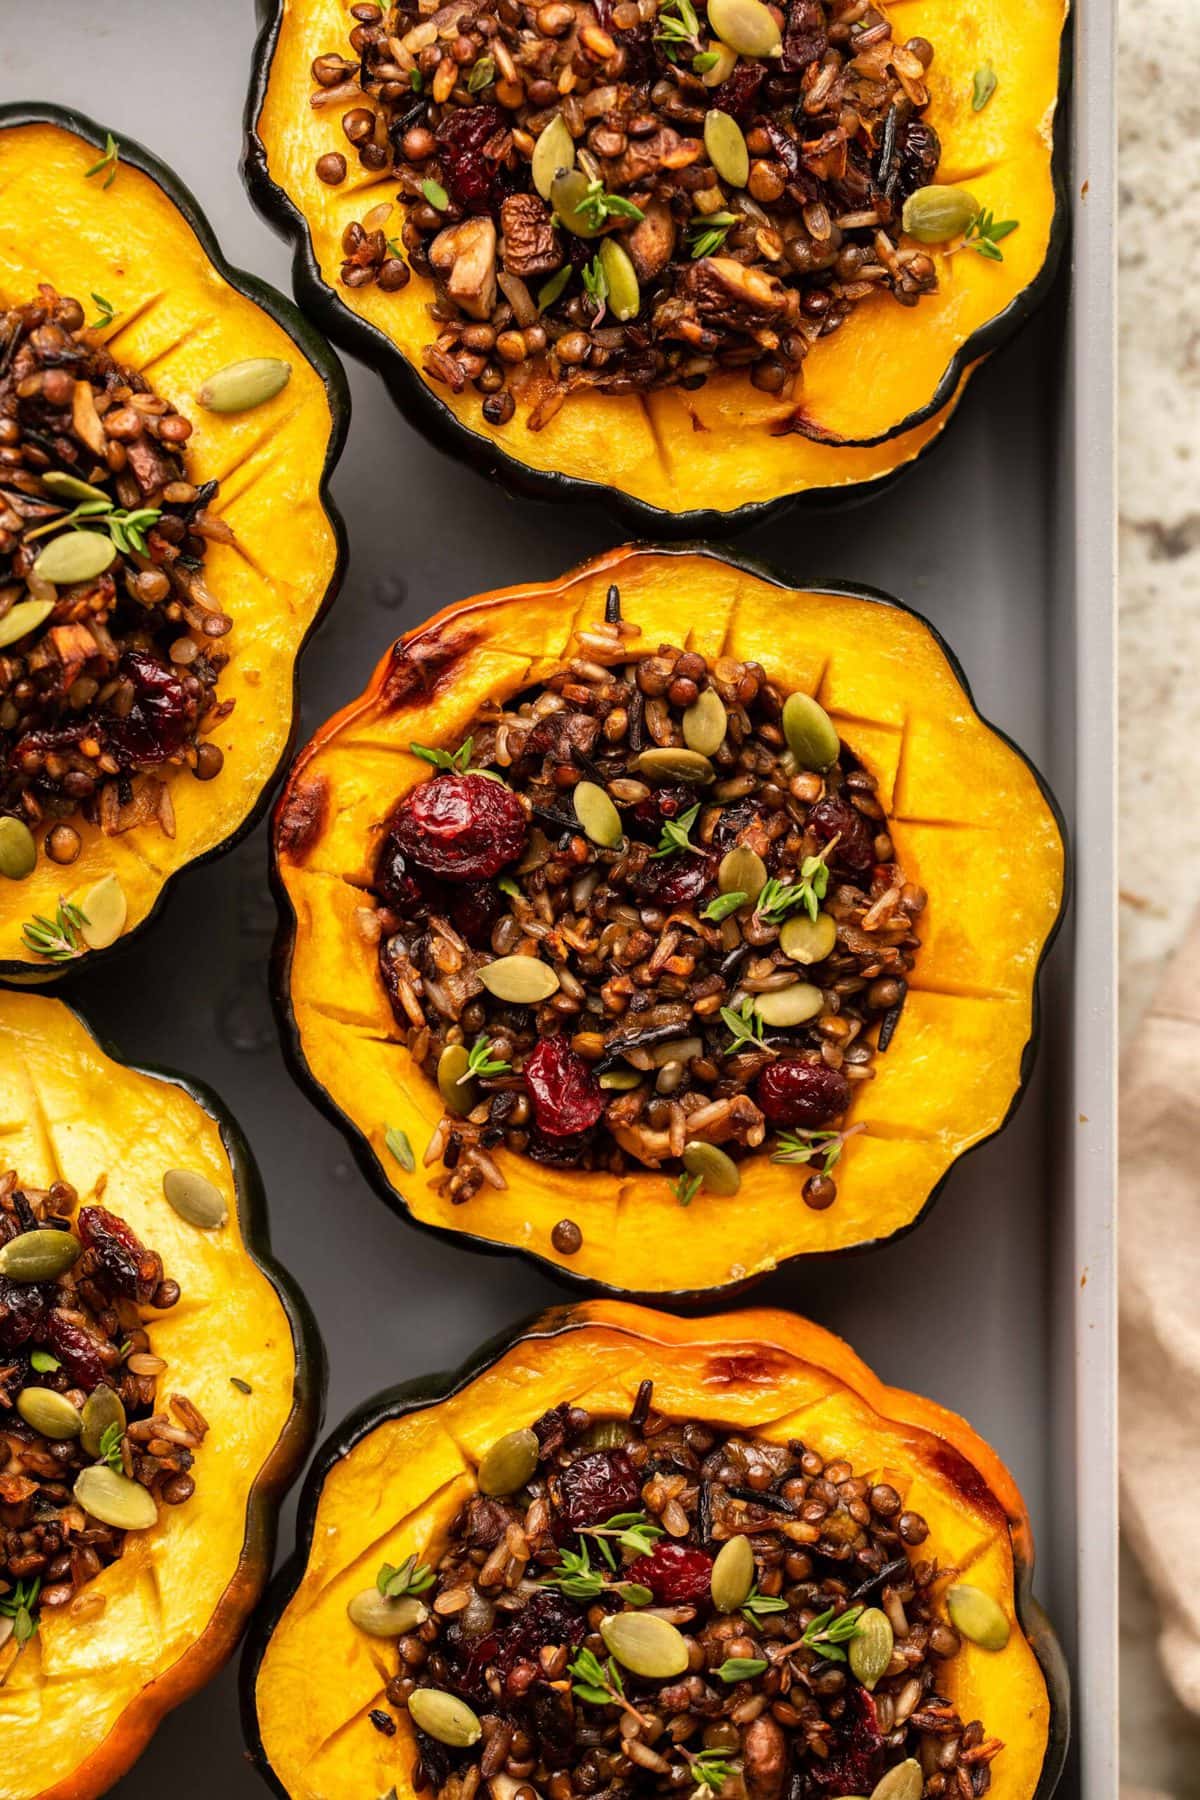 Cooked acorn squash stuffed with a crispy lentil and rice filling, then topped with pumpkin seeds